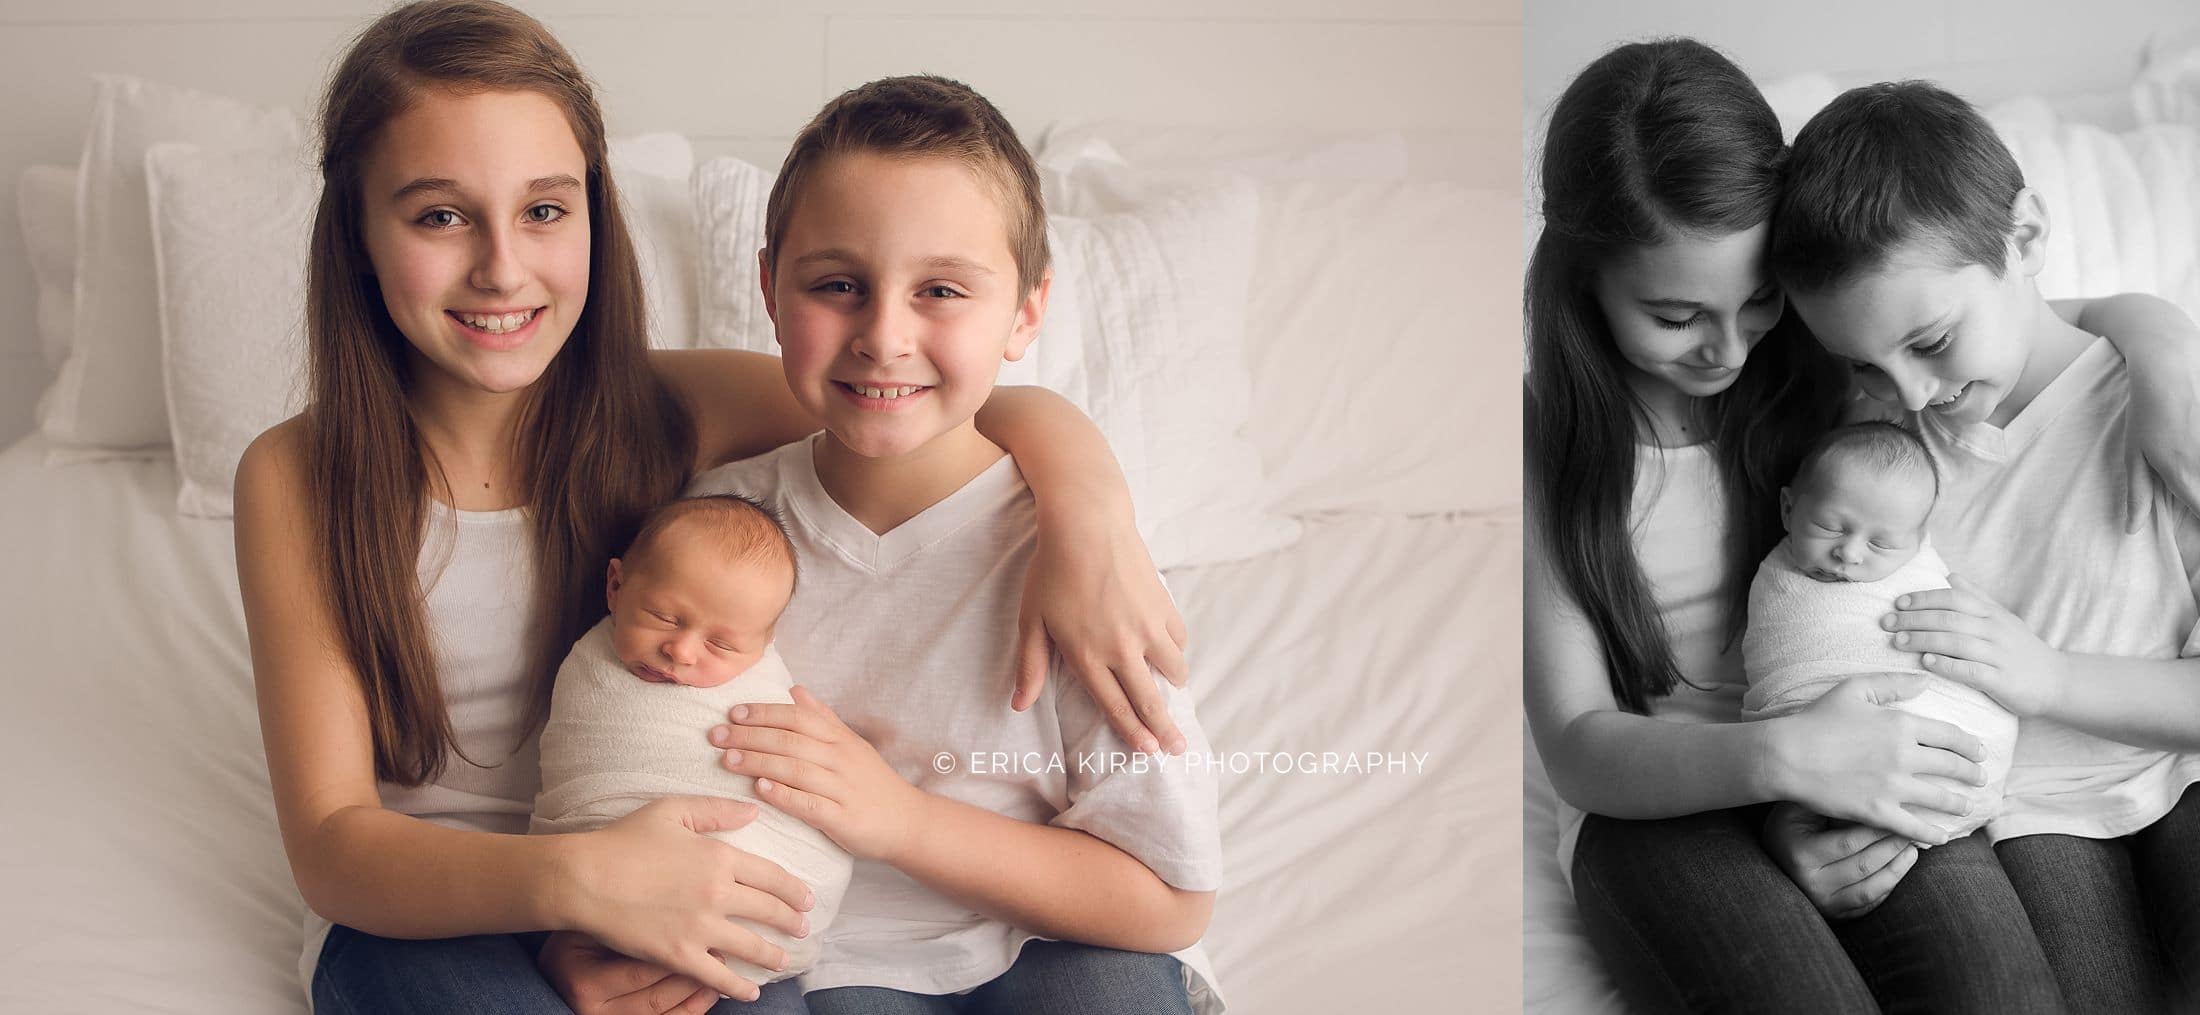 Newborn Photographers NWA | Newborn baby boy photo session in Rogers AR baby with big sister and brother on white bed | Erica Kirby Photography 